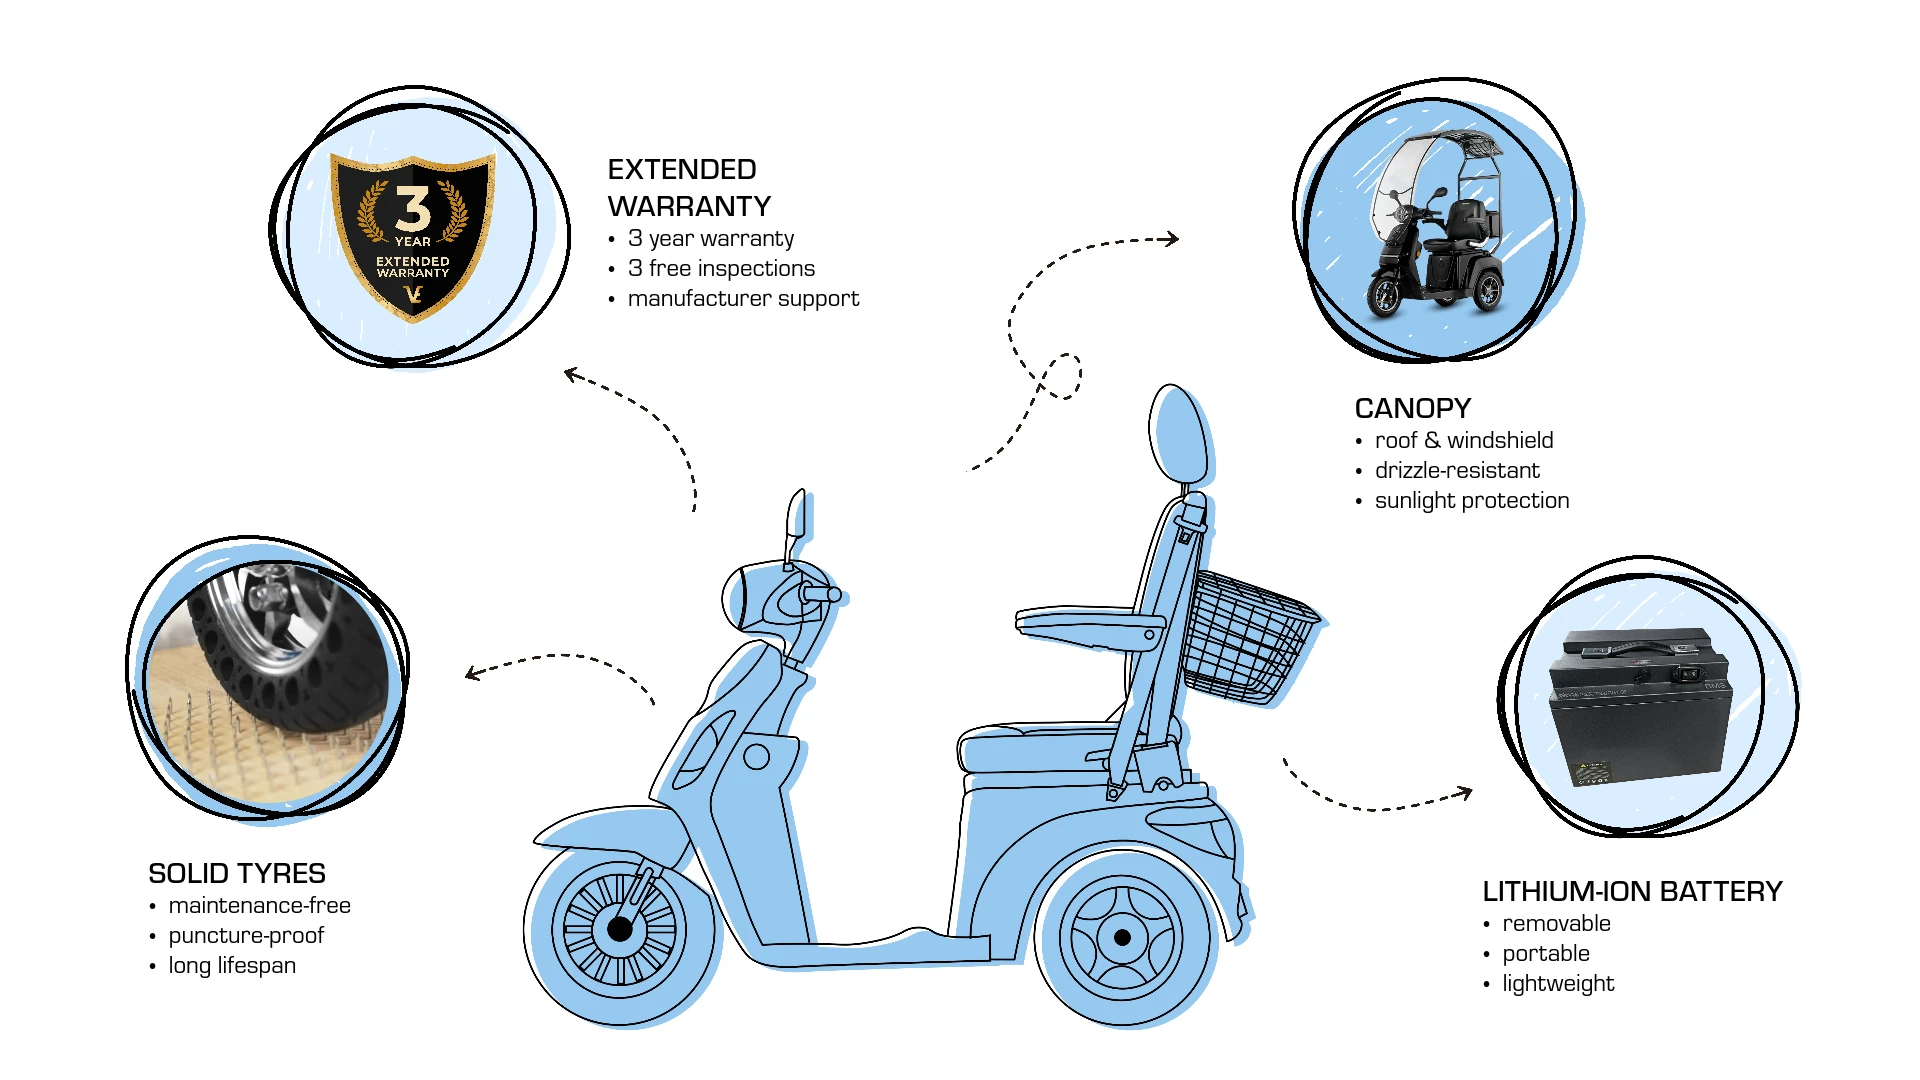 Veleco DRACO with captain seta extras, upgrades, solid tyres for mobility scooter, extended warranty, roof and windshield, lithium-ion battery